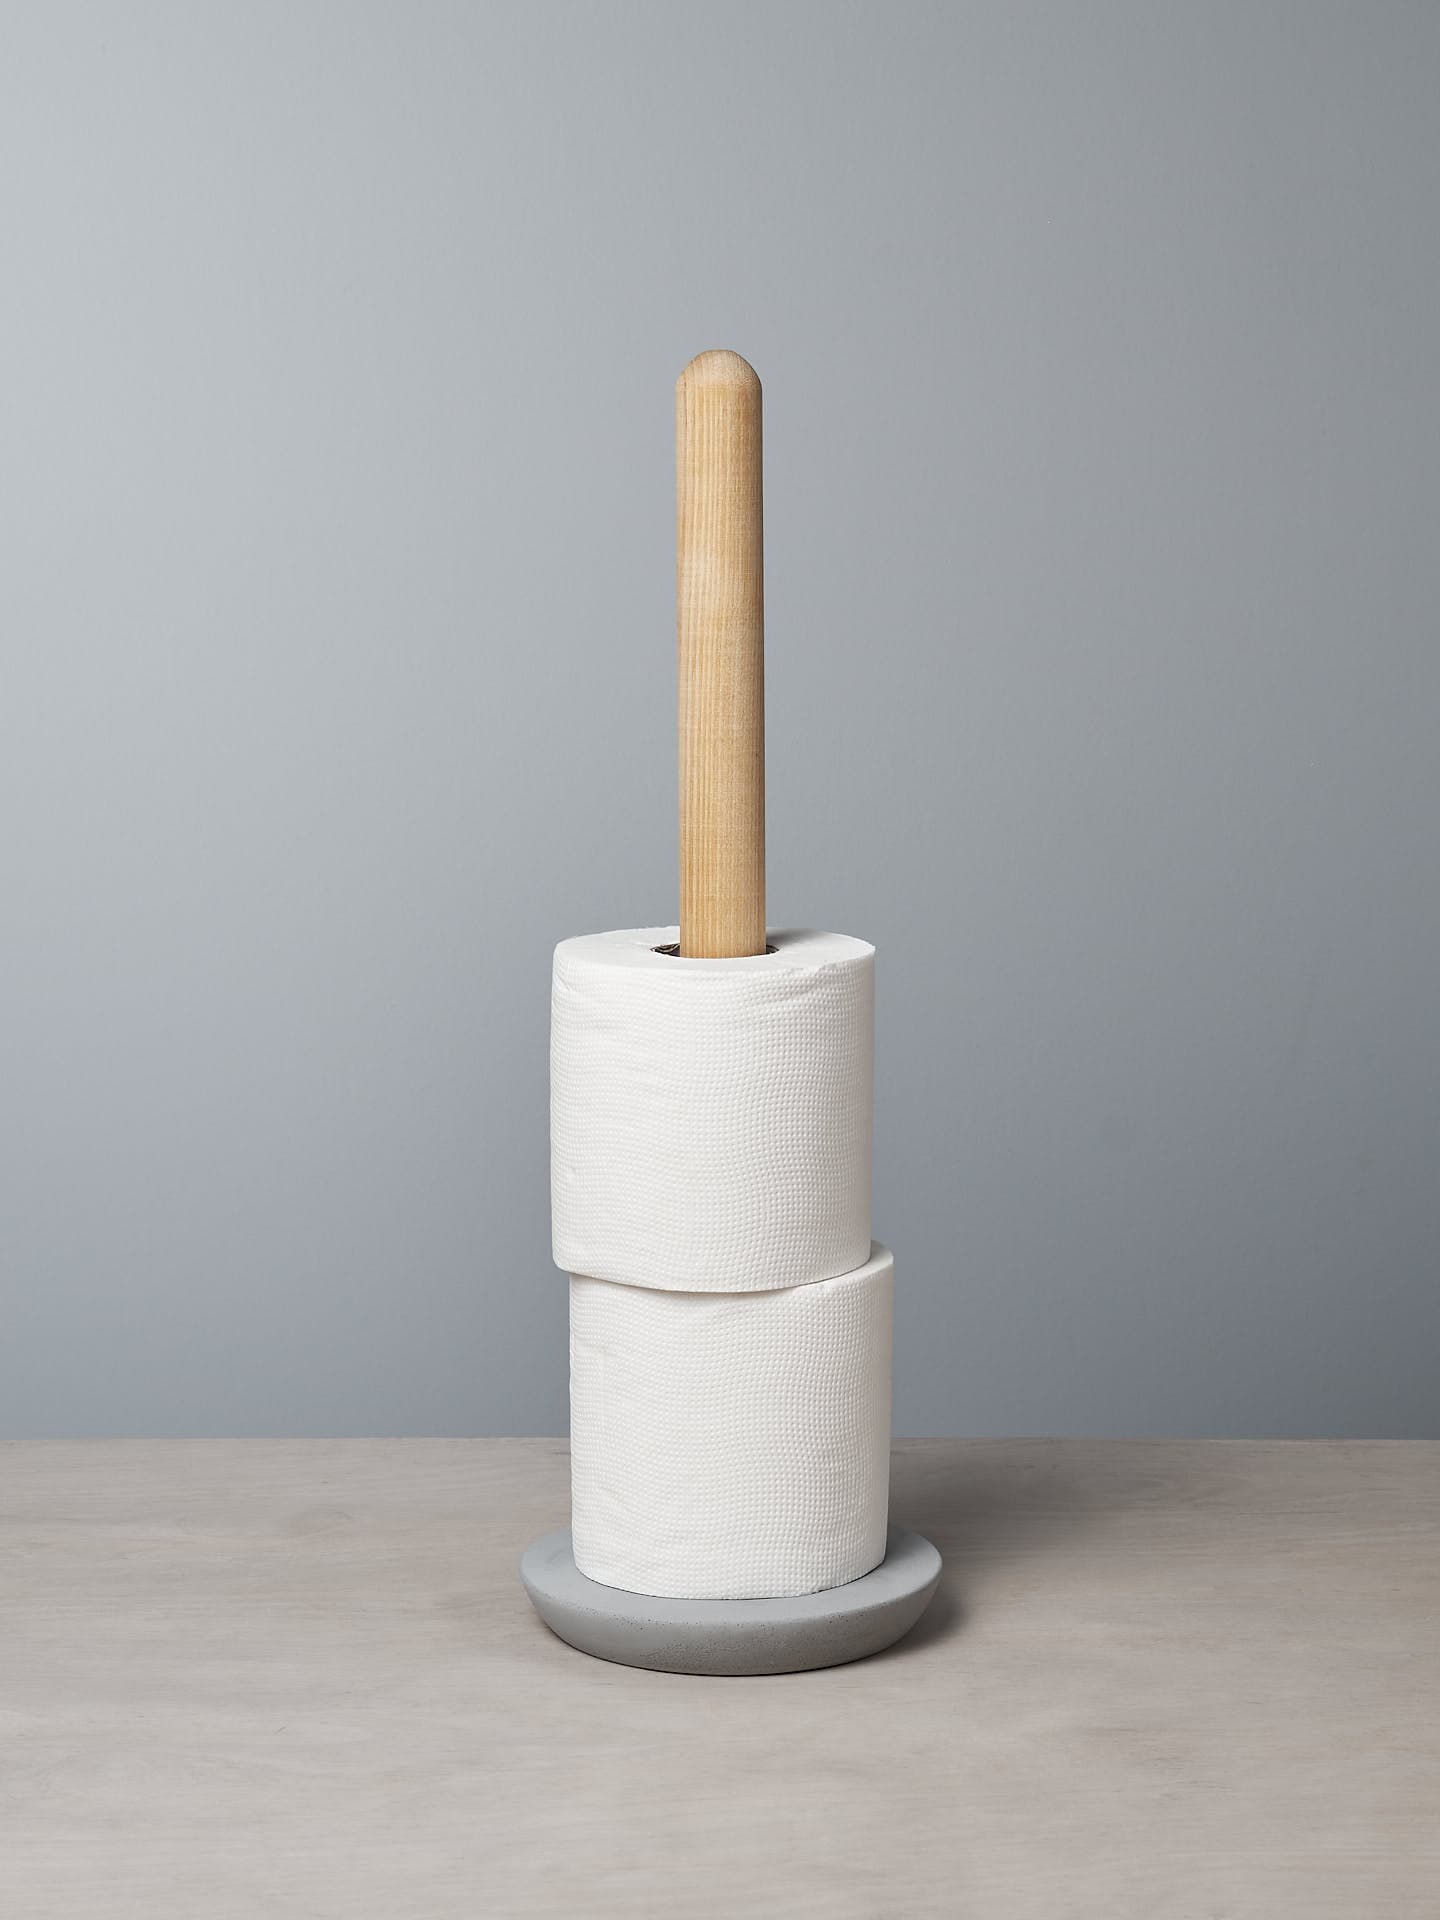 An Iris Hantverk Toilet Roll Holder with two rolls of toilet paper stacked on it, standing on a soft concrete surface against a light gray background.